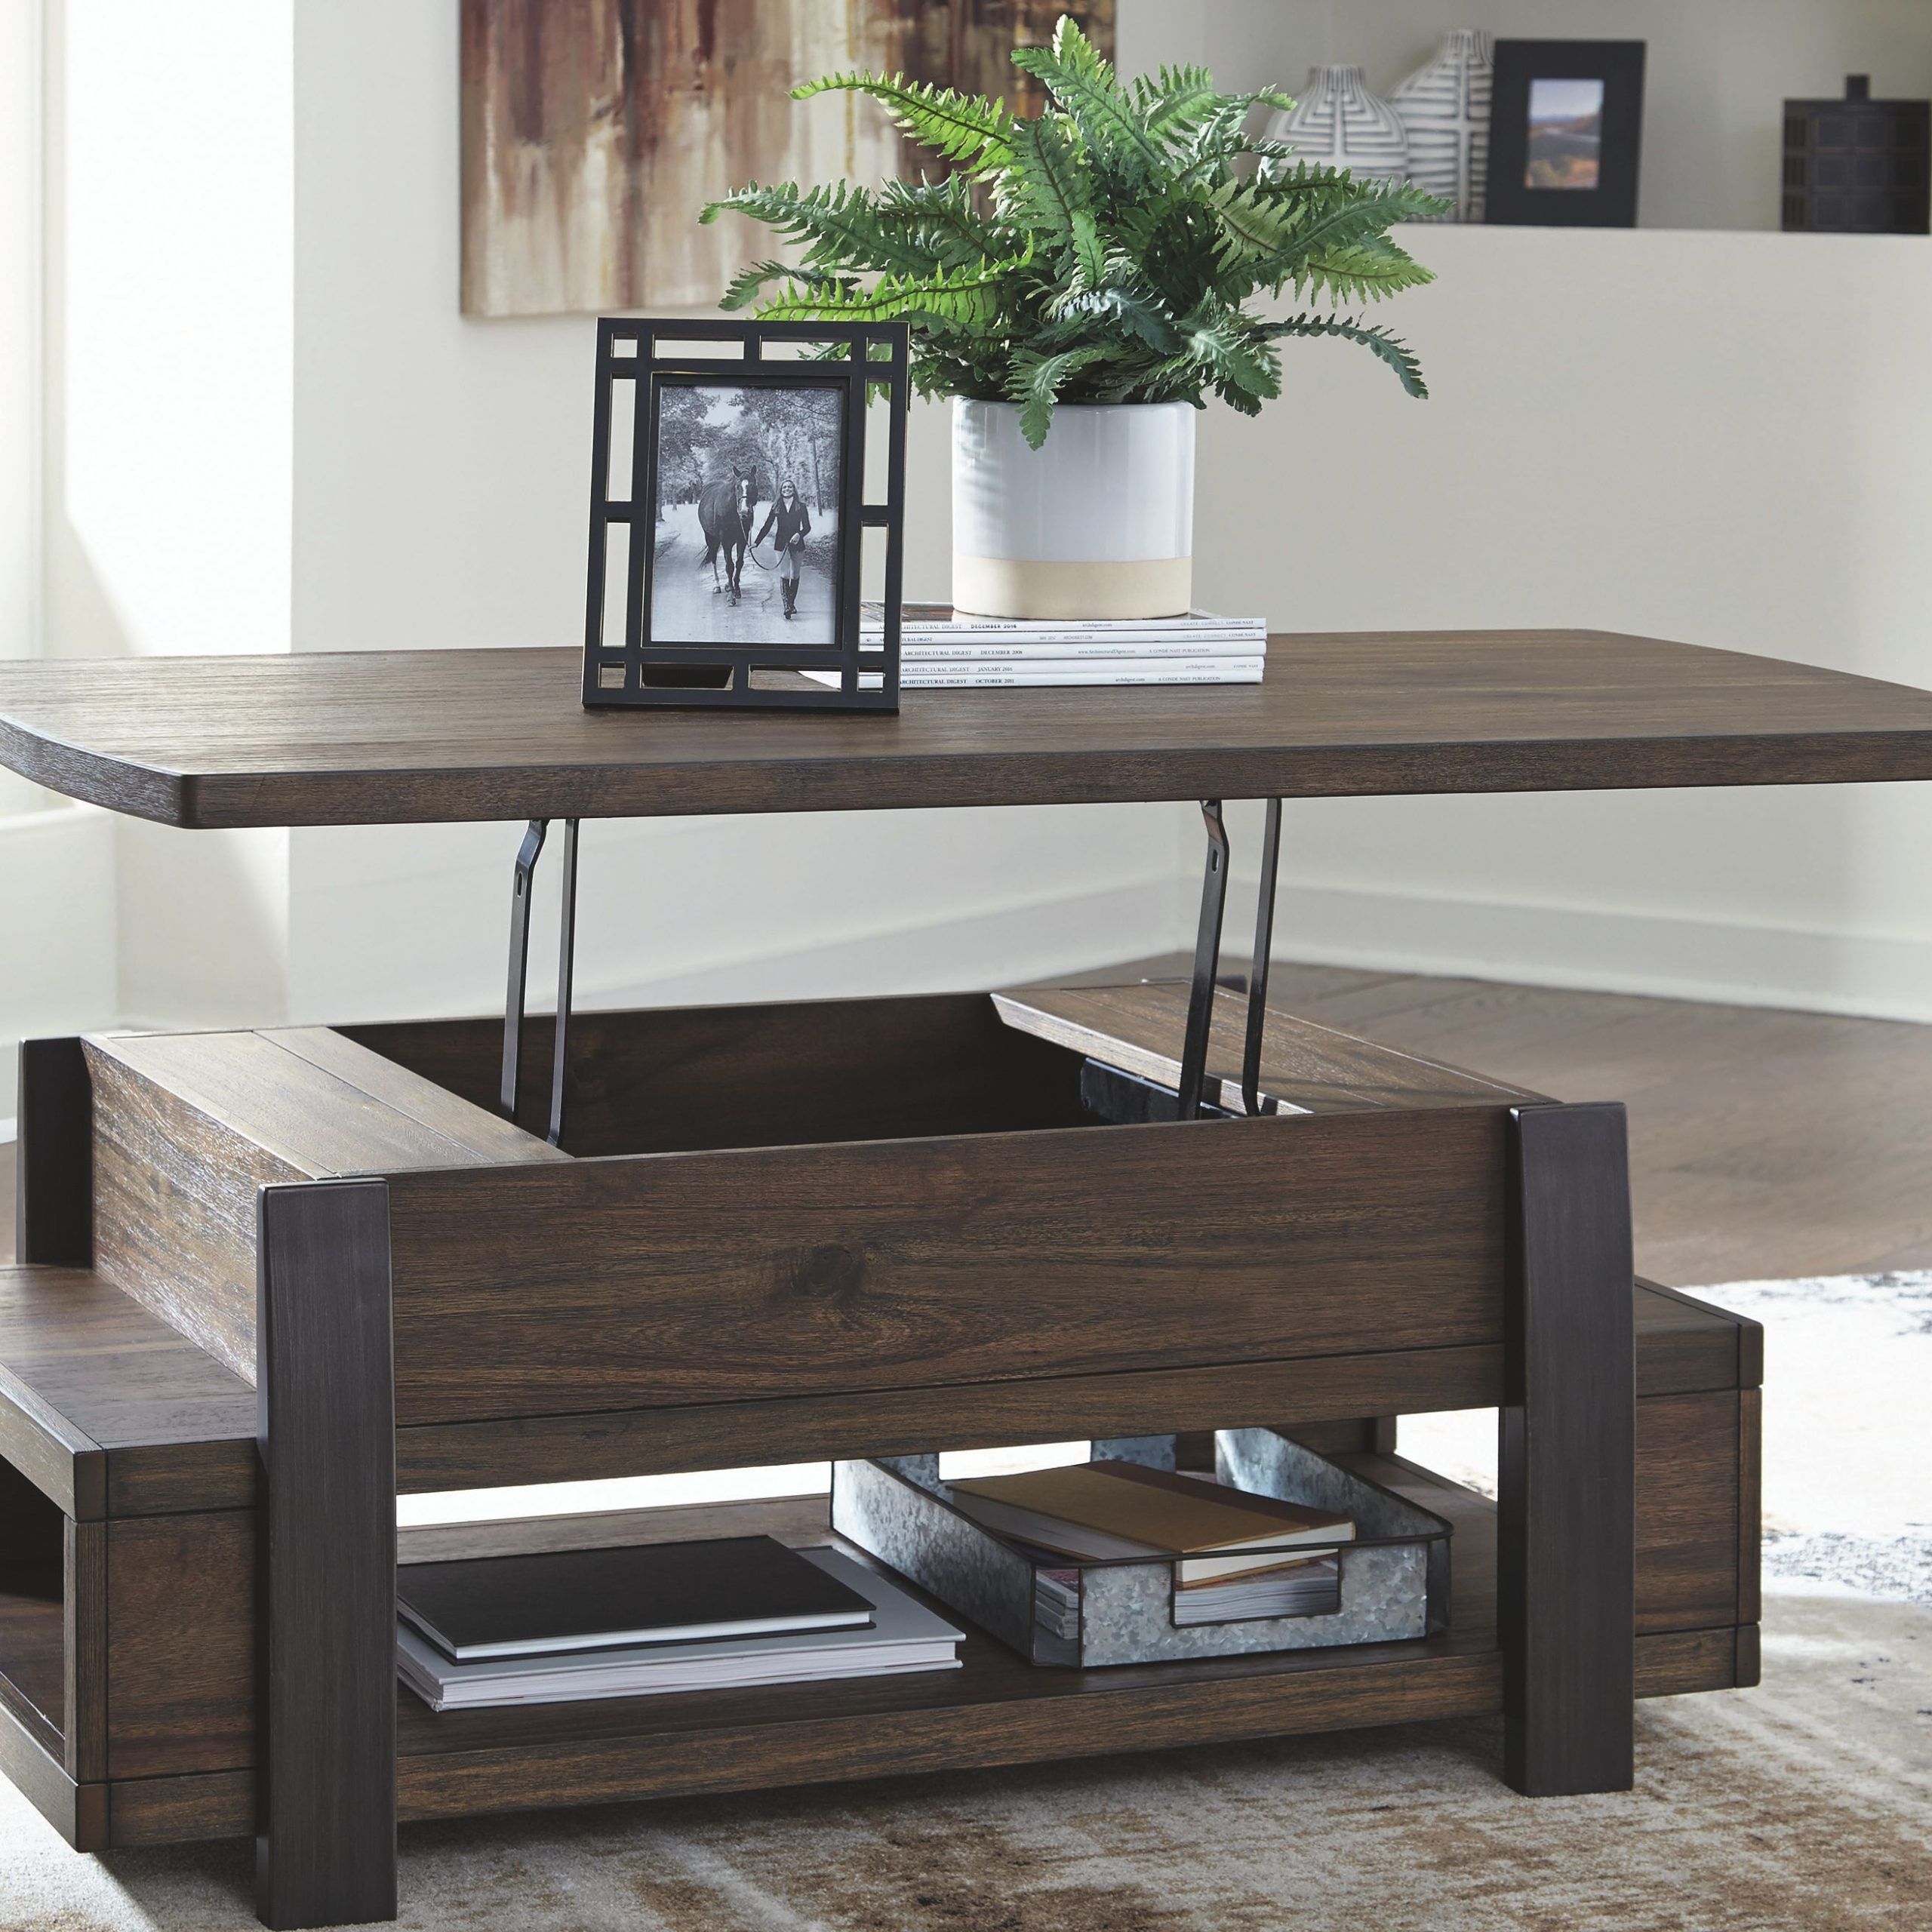 Vailbry Coffee Table With Lift Top, Brown | Lift Top Coffee Table Inside Wood Lift Top Coffee Tables (View 13 of 15)